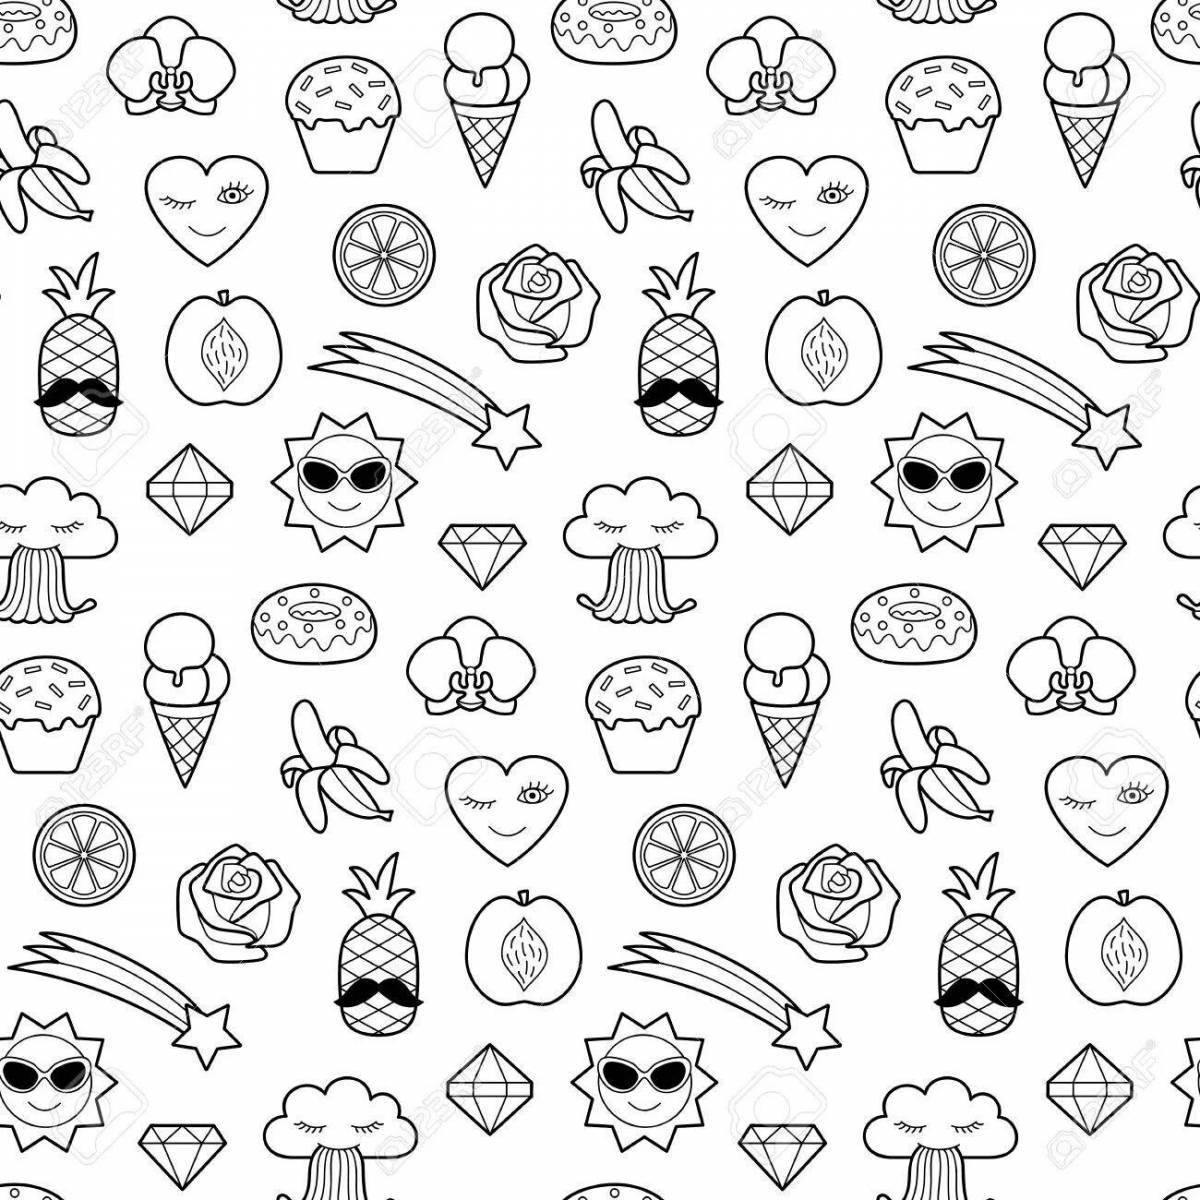 Patches for kind coloring pages